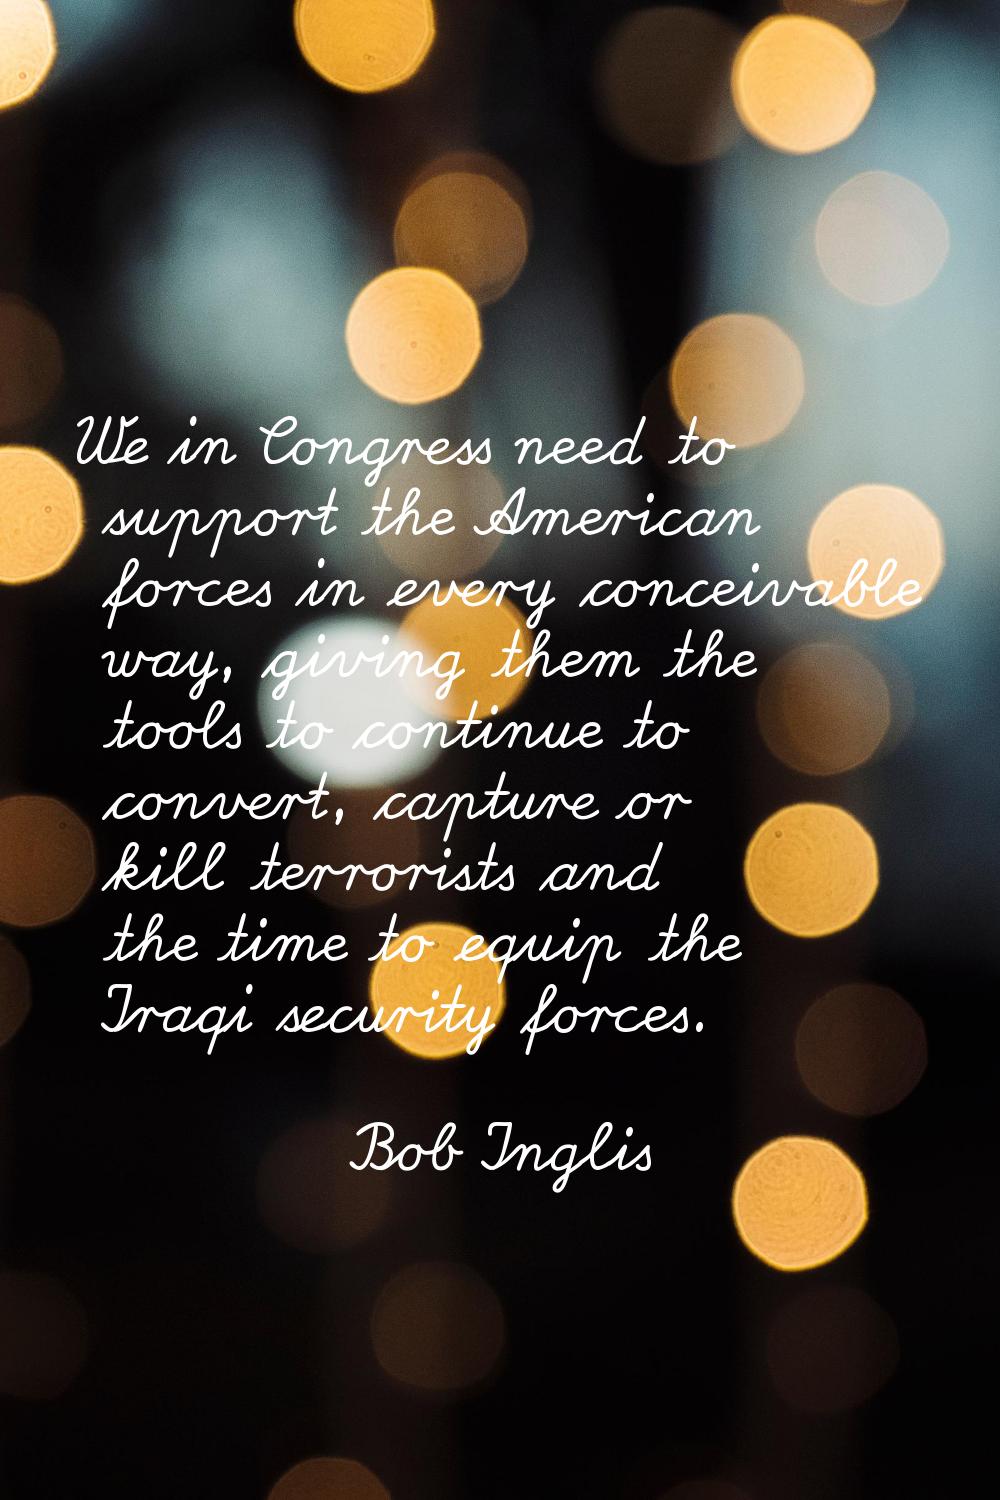 We in Congress need to support the American forces in every conceivable way, giving them the tools 